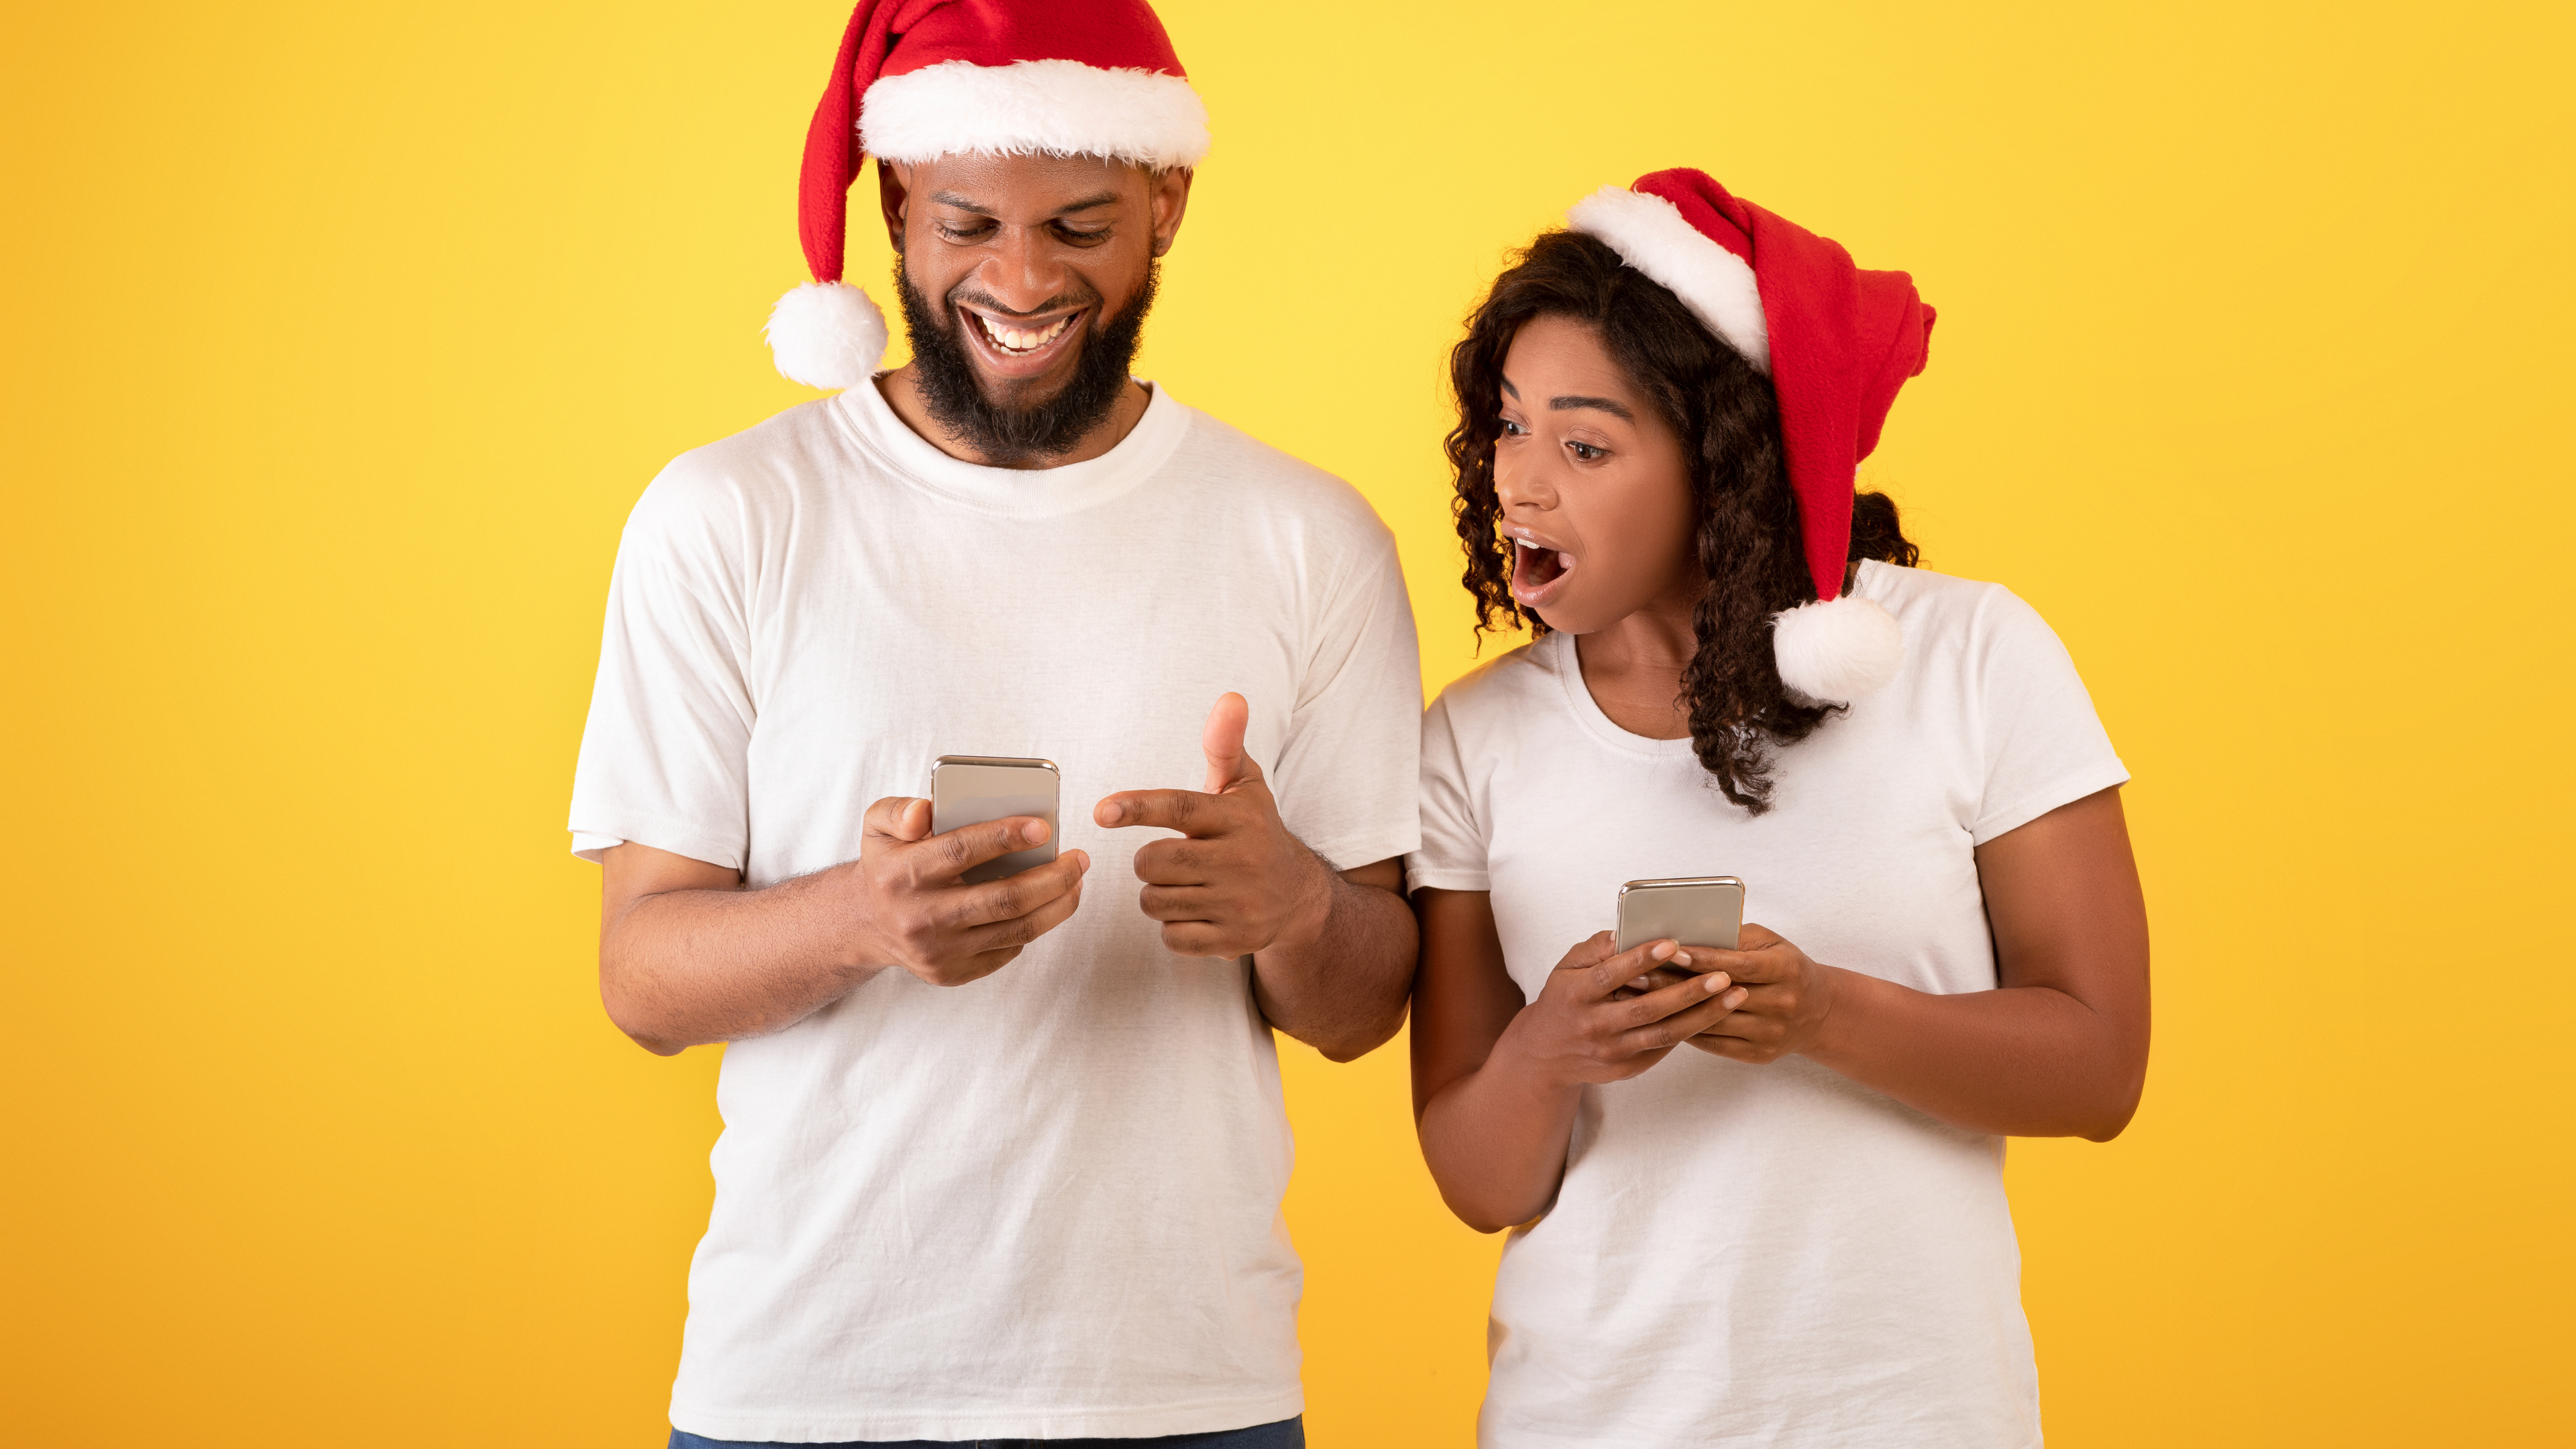 Wow Christmas mobile app. Surprised adults looking at smartphones, posing and wearing Santa hats